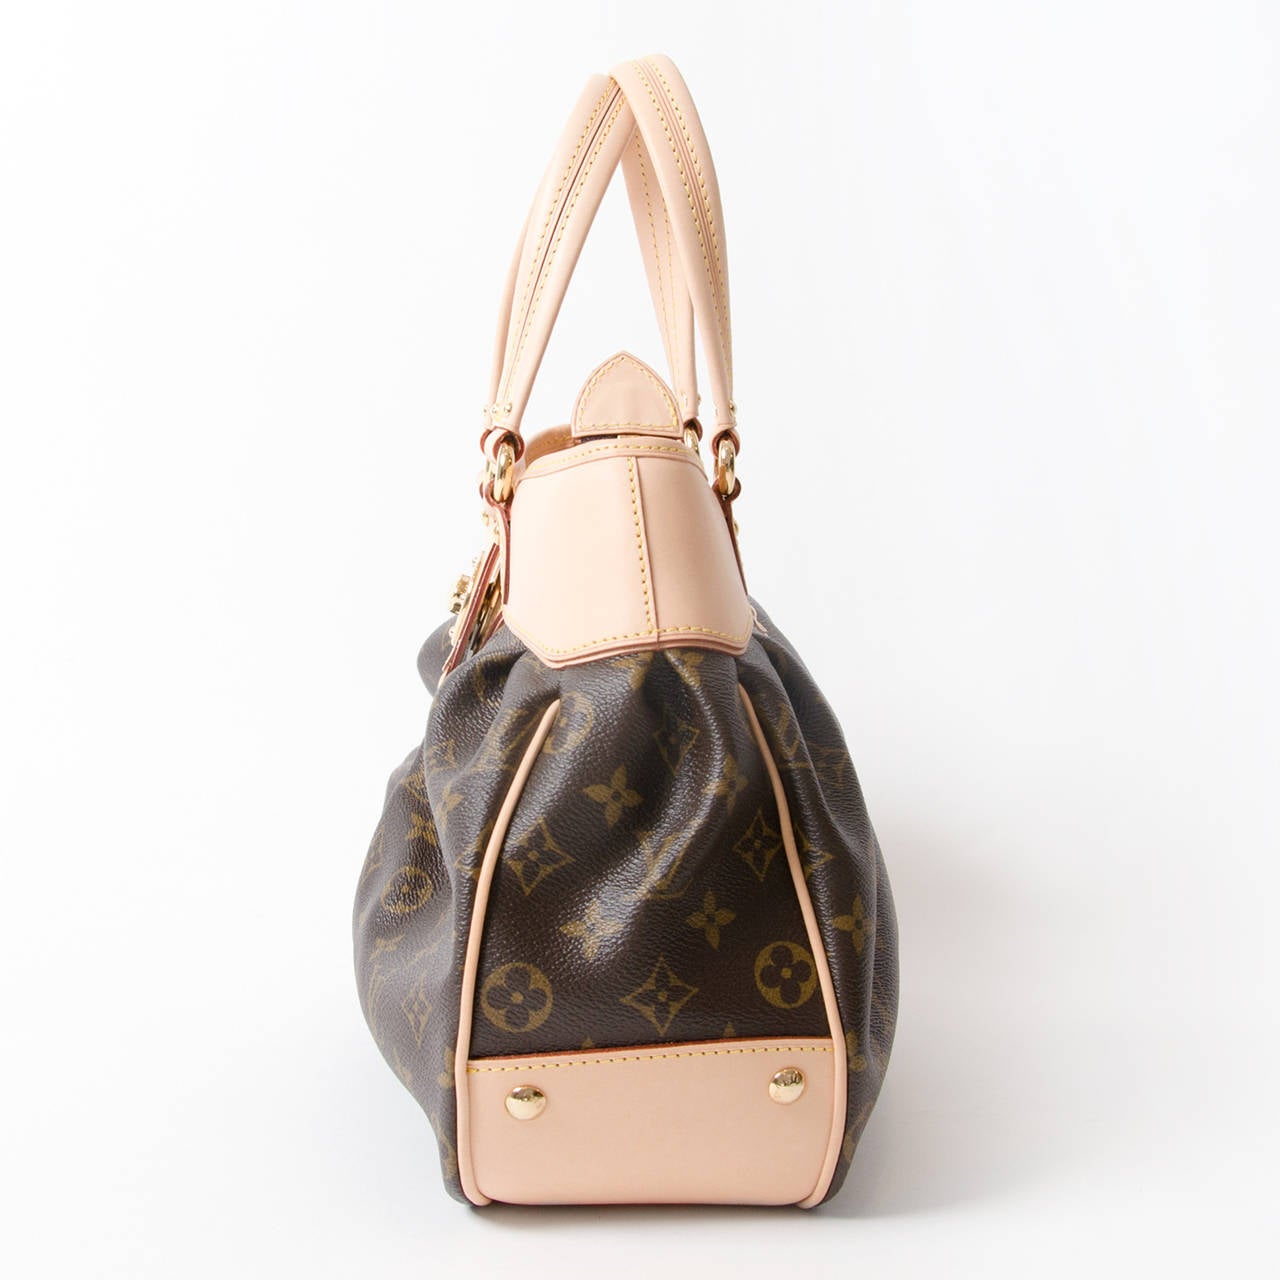 The Louis Vuitton Monogram Canvas Boetie PM is an elegant and practical bag. This bag has a feminine flair with its pleated details and engraved twist-lock closure. Golden brass studs are found on the bag's bottom side to protect from surface